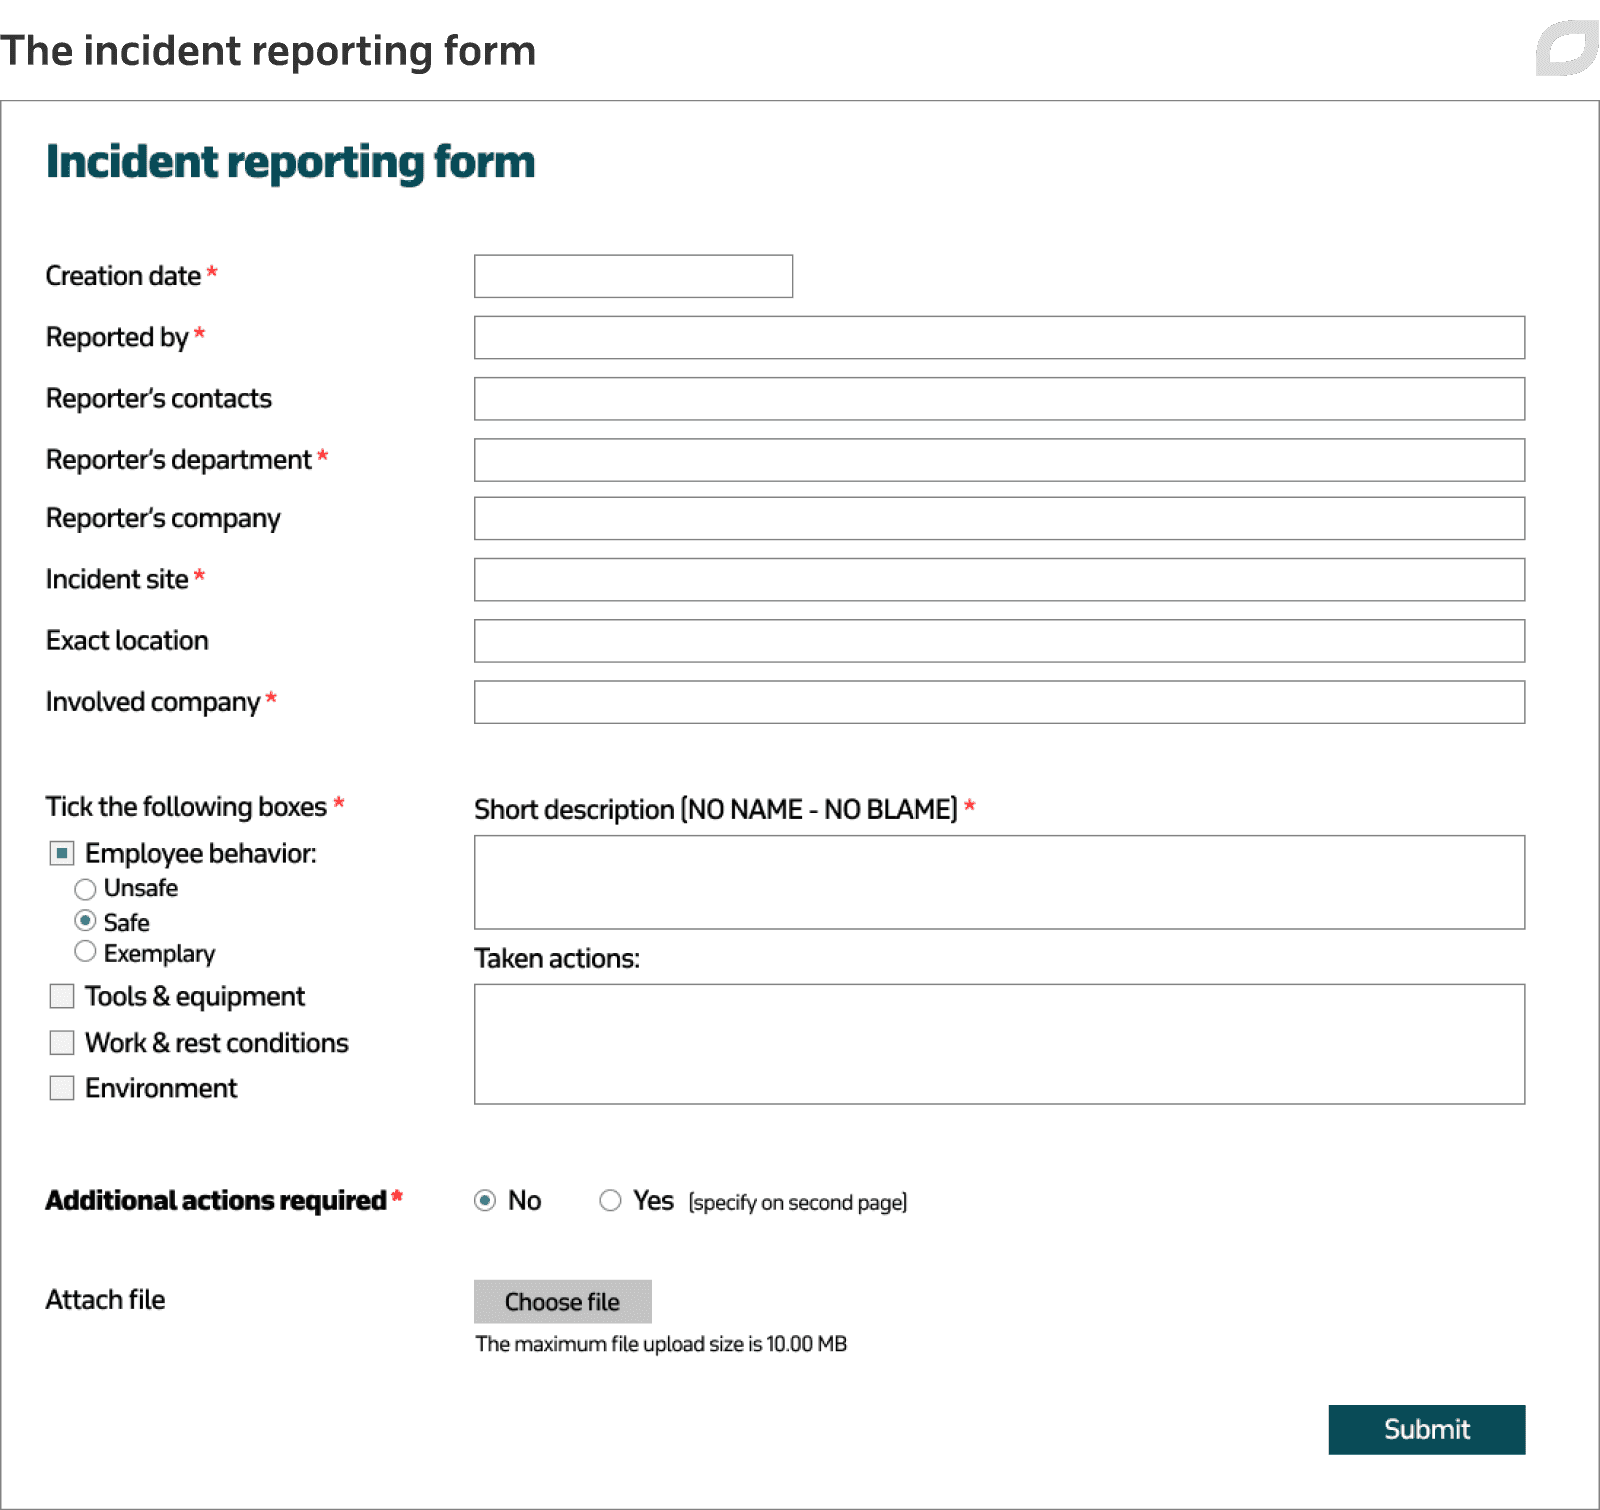 The incident reporting form